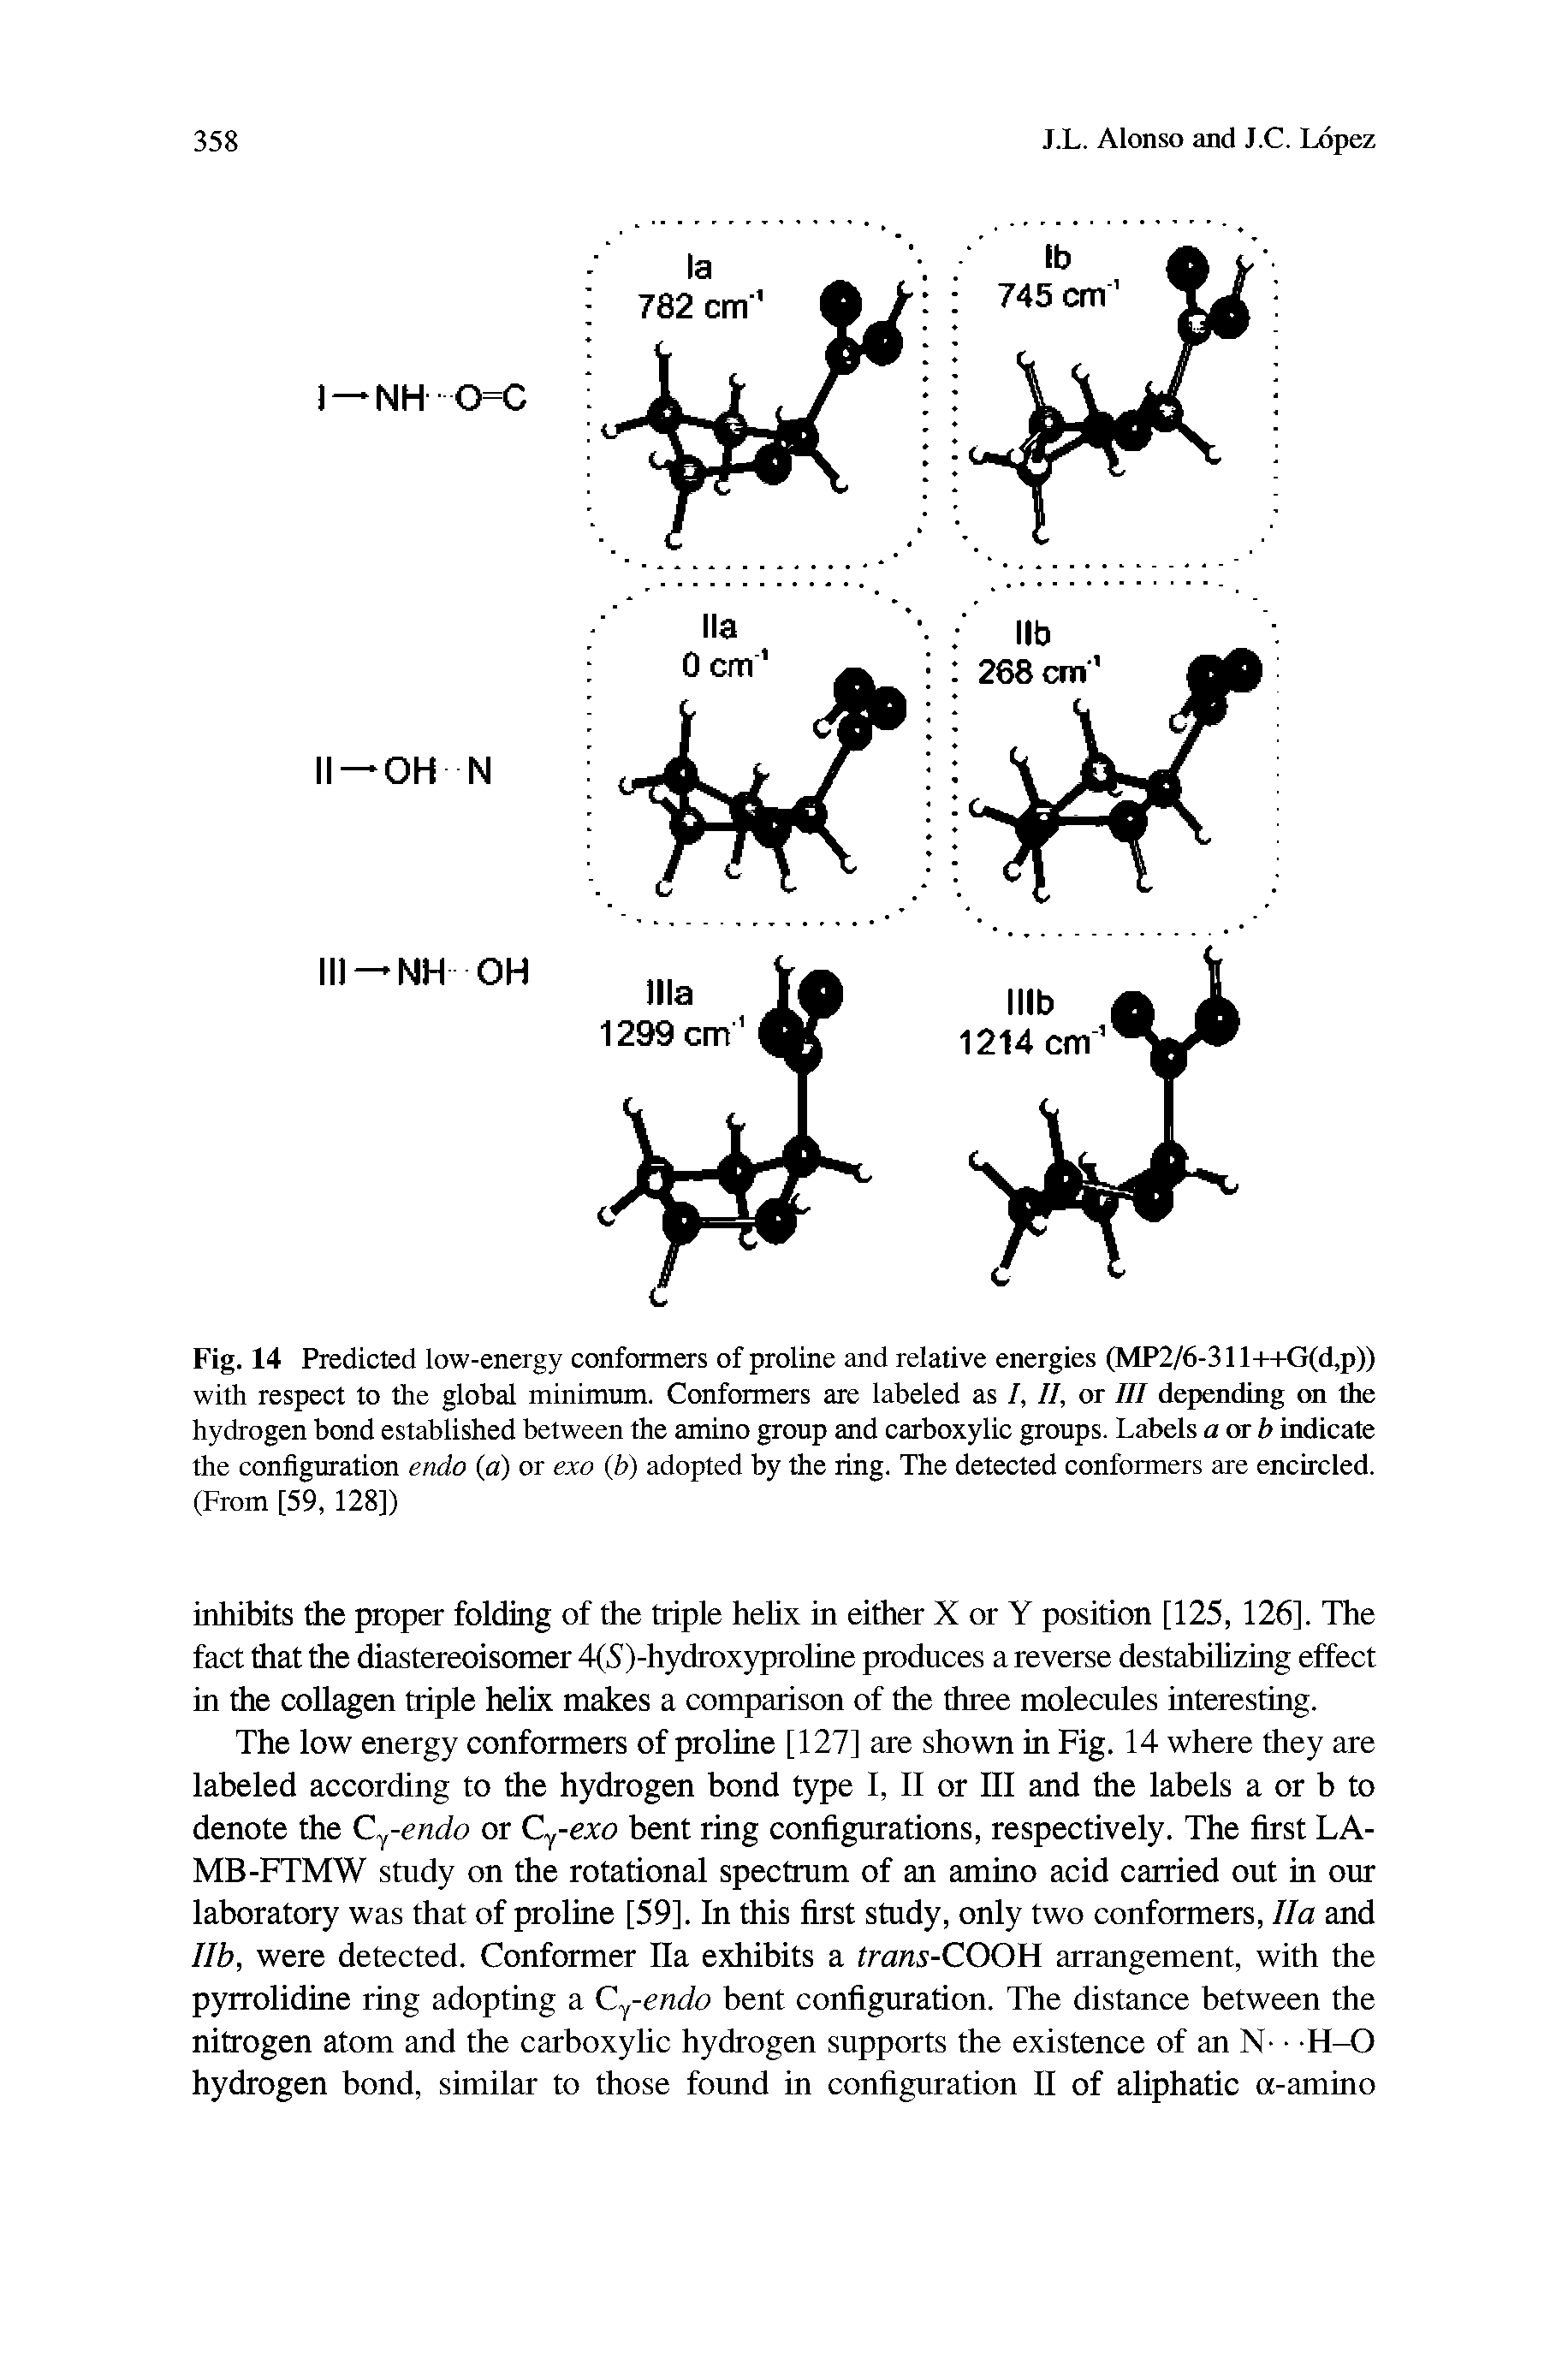 Fig. 14 Predicted low-energy conformers of proline and relative energies (MP2/6-311-H-G(d,p)) with respect to the global minimum. Conformers ate labeled as I, II, or III depending on the hydrogen bond established between the amino group and carboxylic groups. Labels aotb indicate the configuration endo (a) or exo (h) adopted by the ring. The detected conformers are encircled. (From [59, 128])...